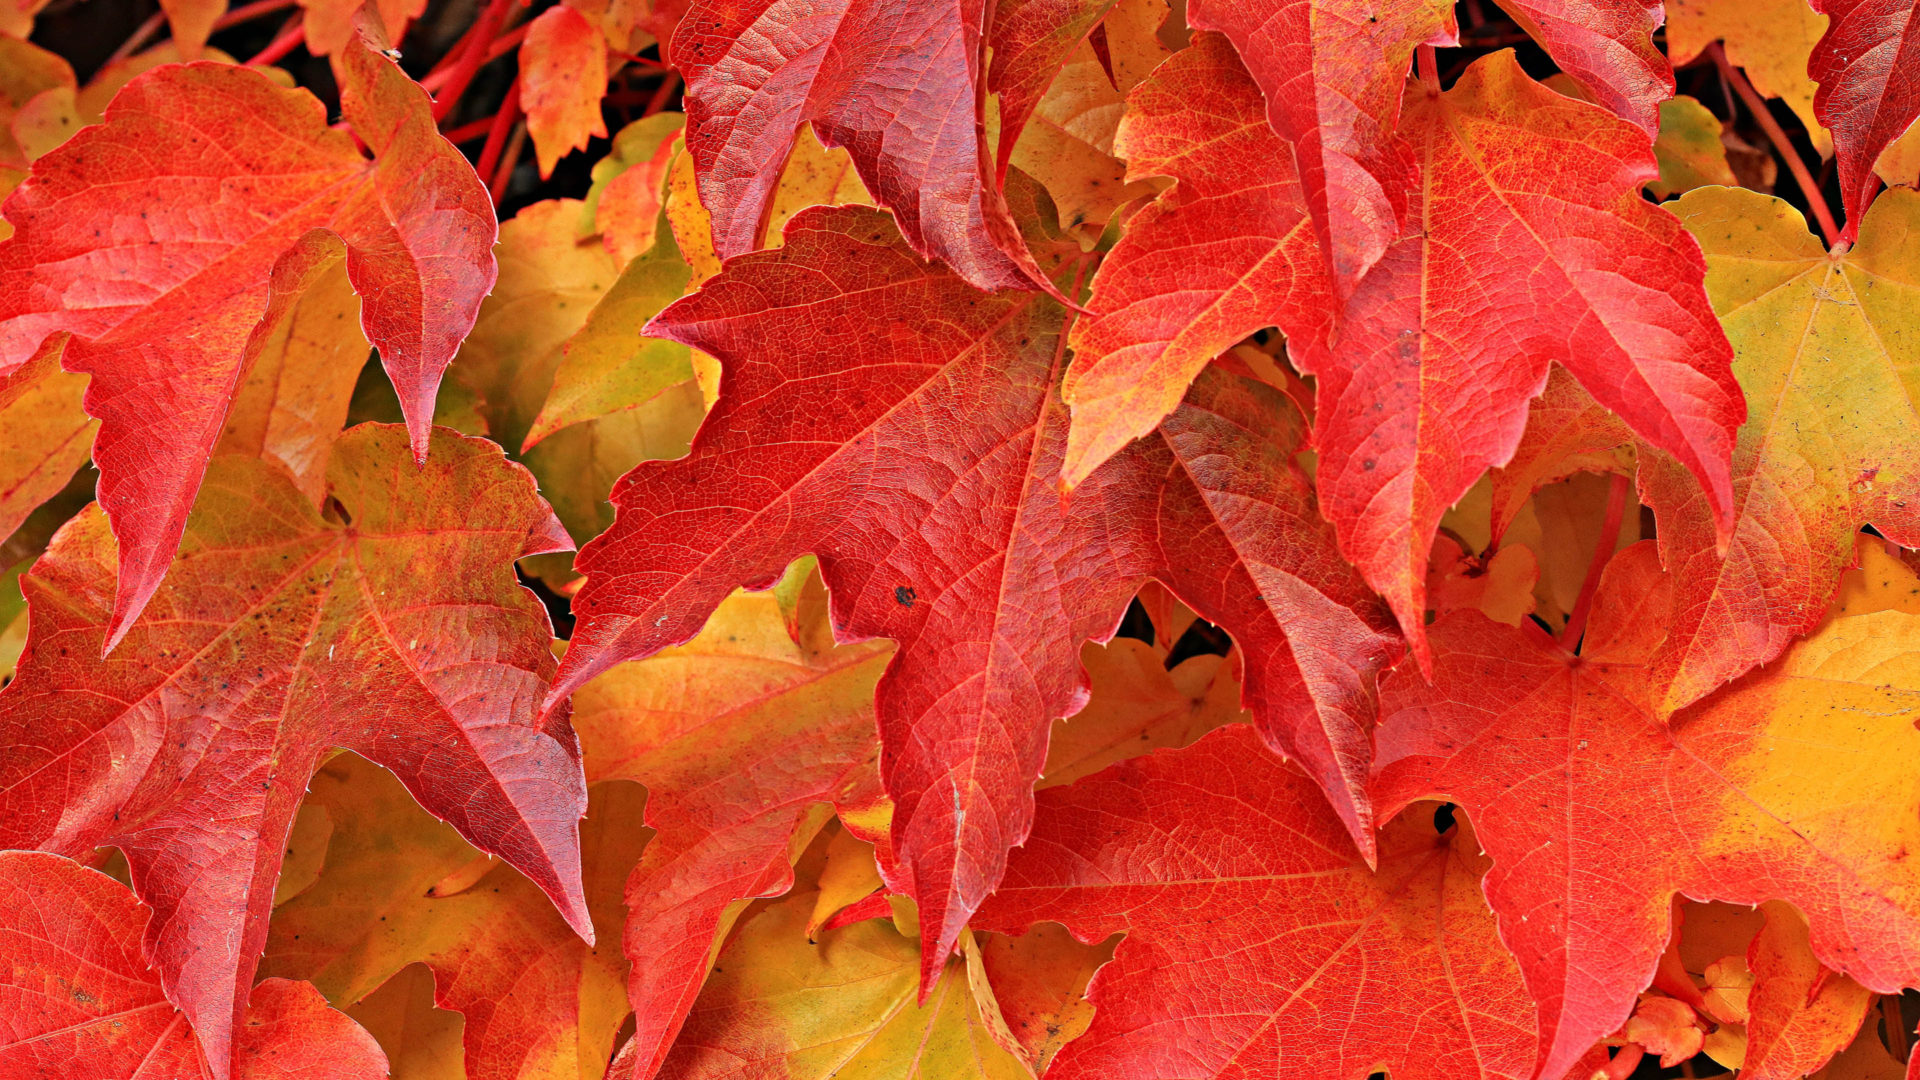 Autumn Leaves Autumn Leaves Red And Yellow Leaves Wallpaper HD 3840x2400, Wallpaper13.com